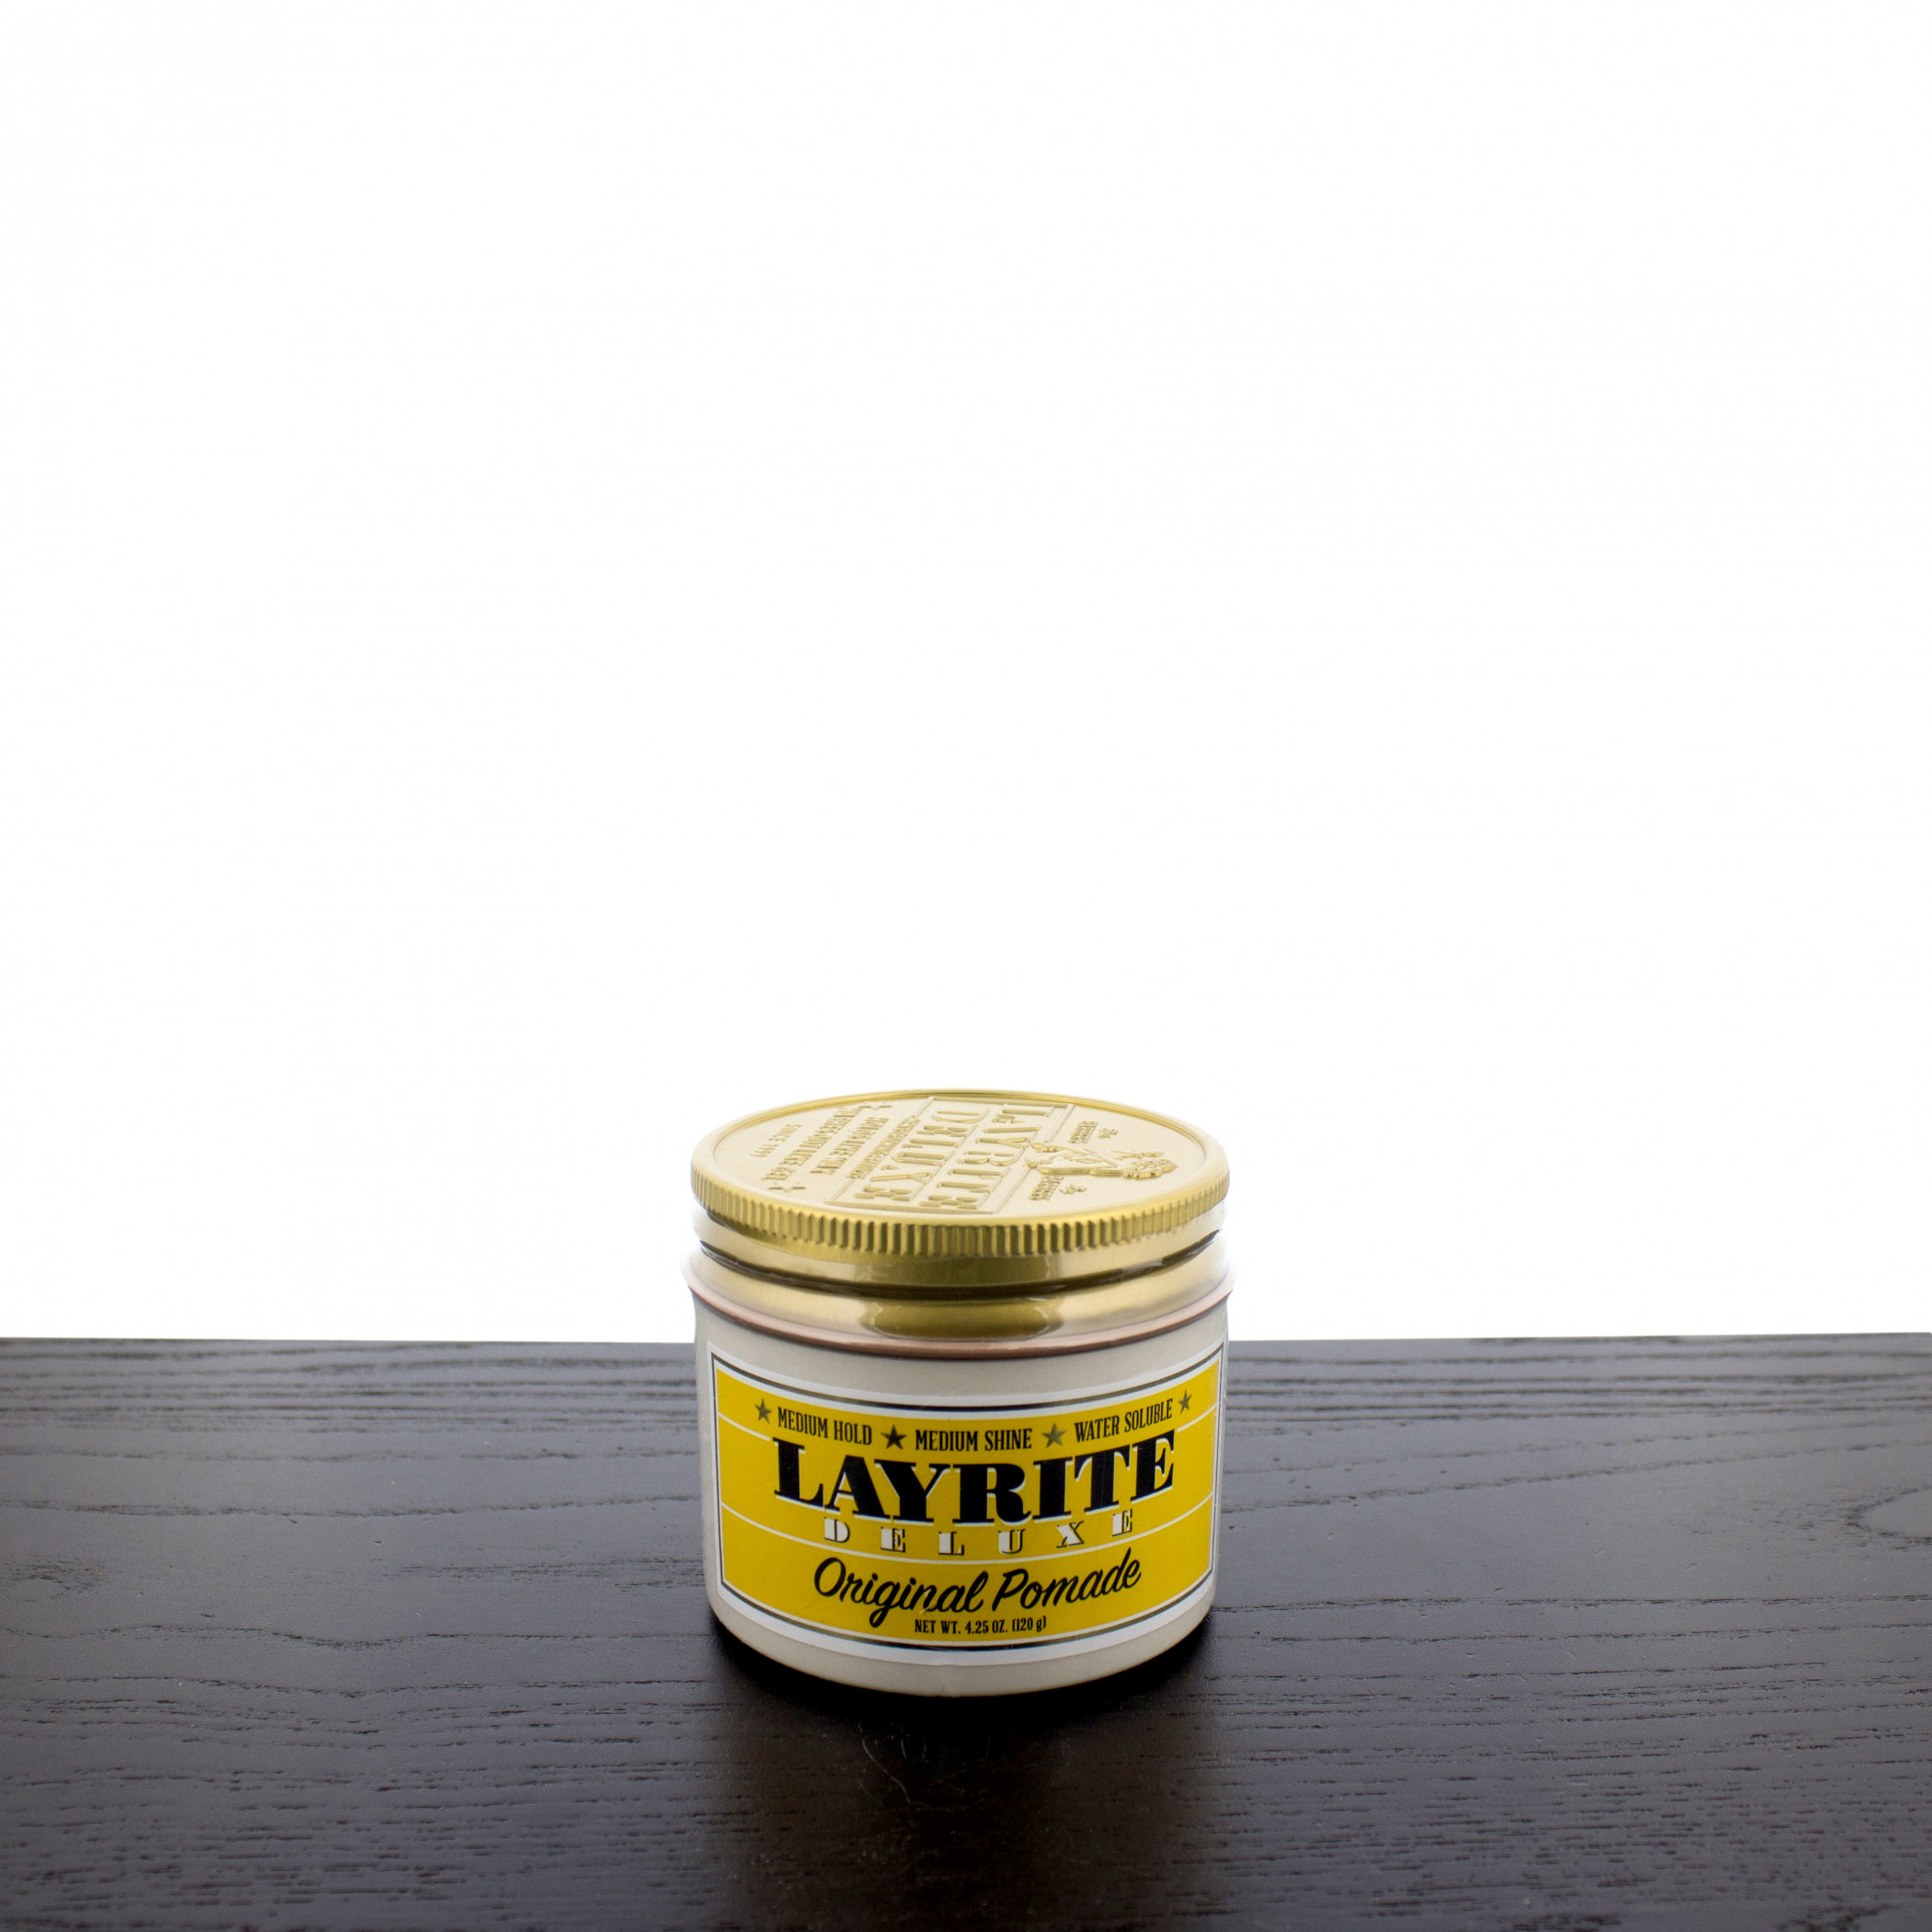 Product image 0 for Layrite Original Pomade